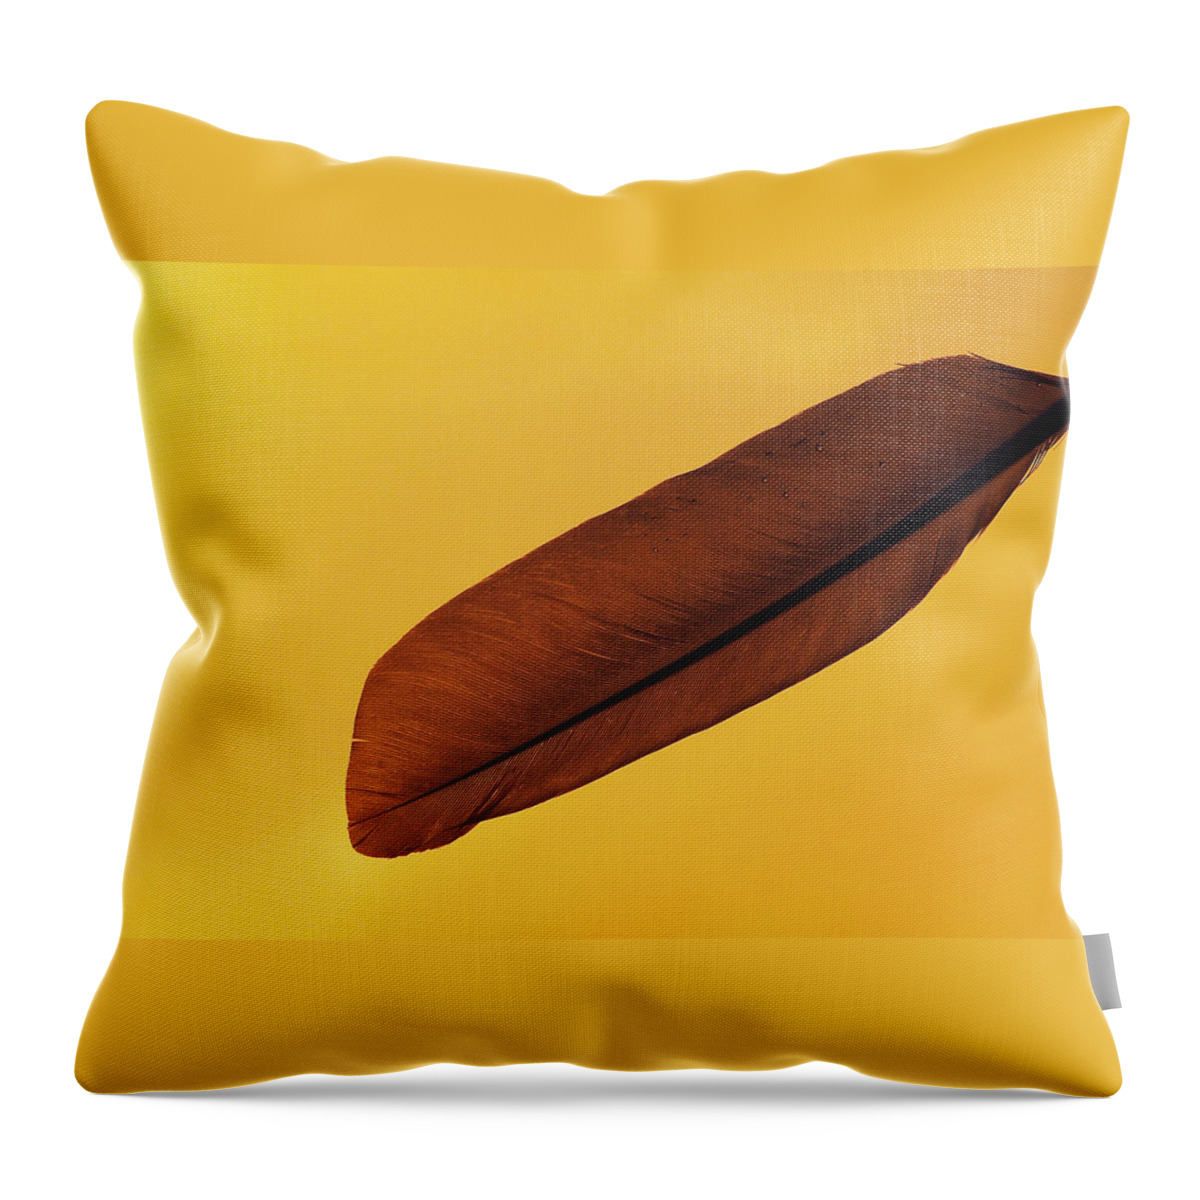 Photograph Throw Pillow featuring the photograph Feather by Larah McElroy